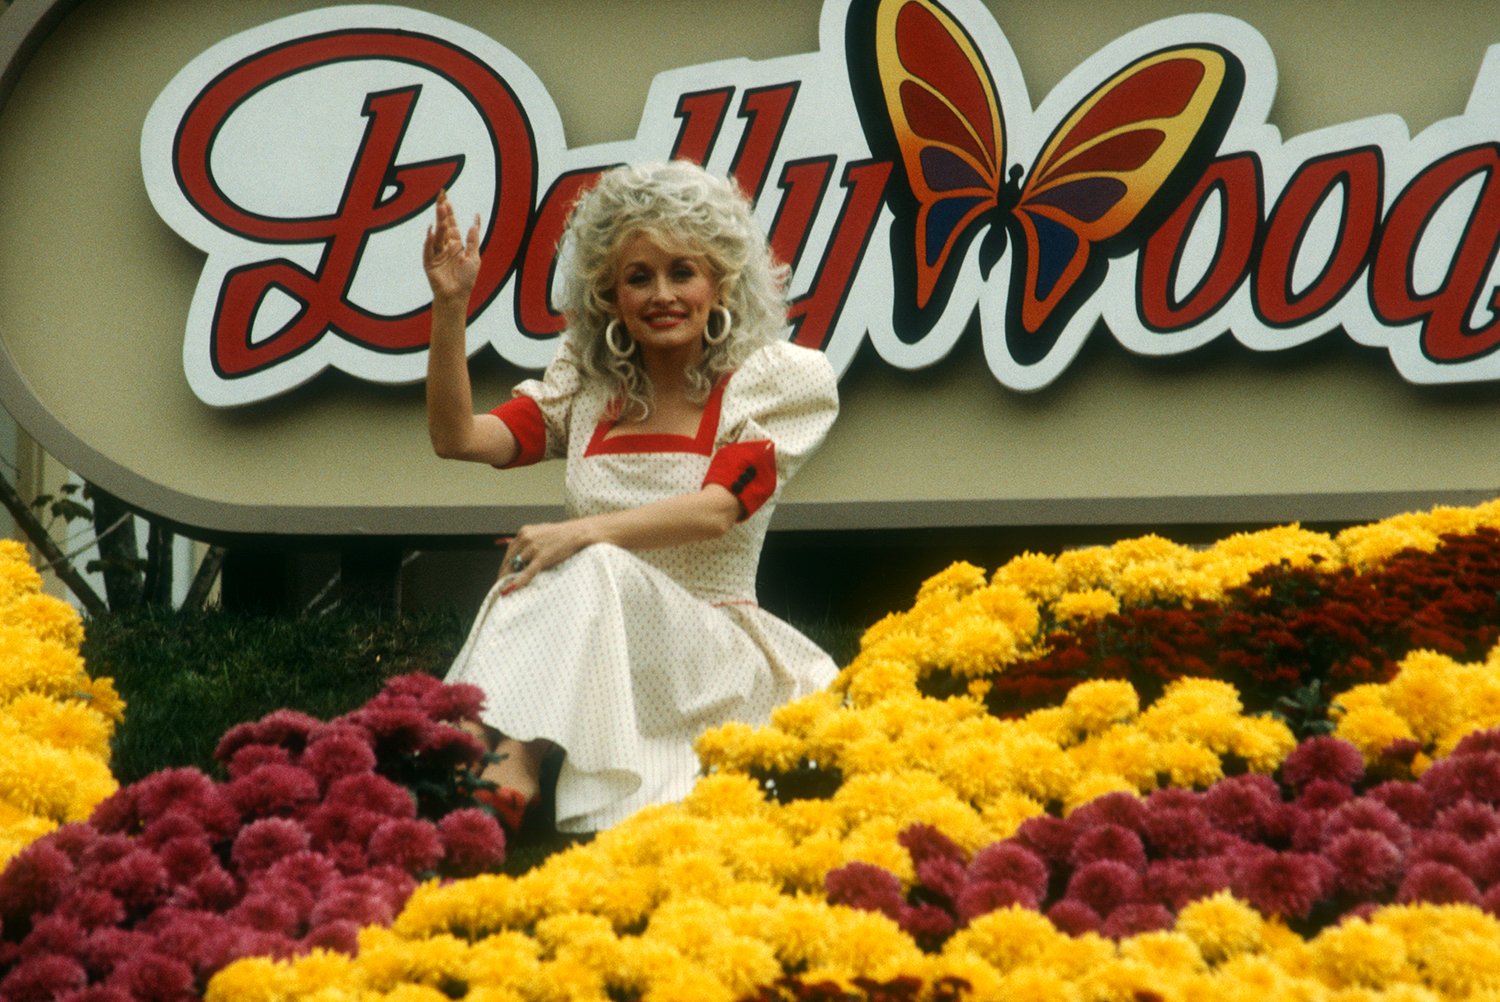 Dolly Parton in front of a Dollywood sign with red and yellow flowers surrounding her